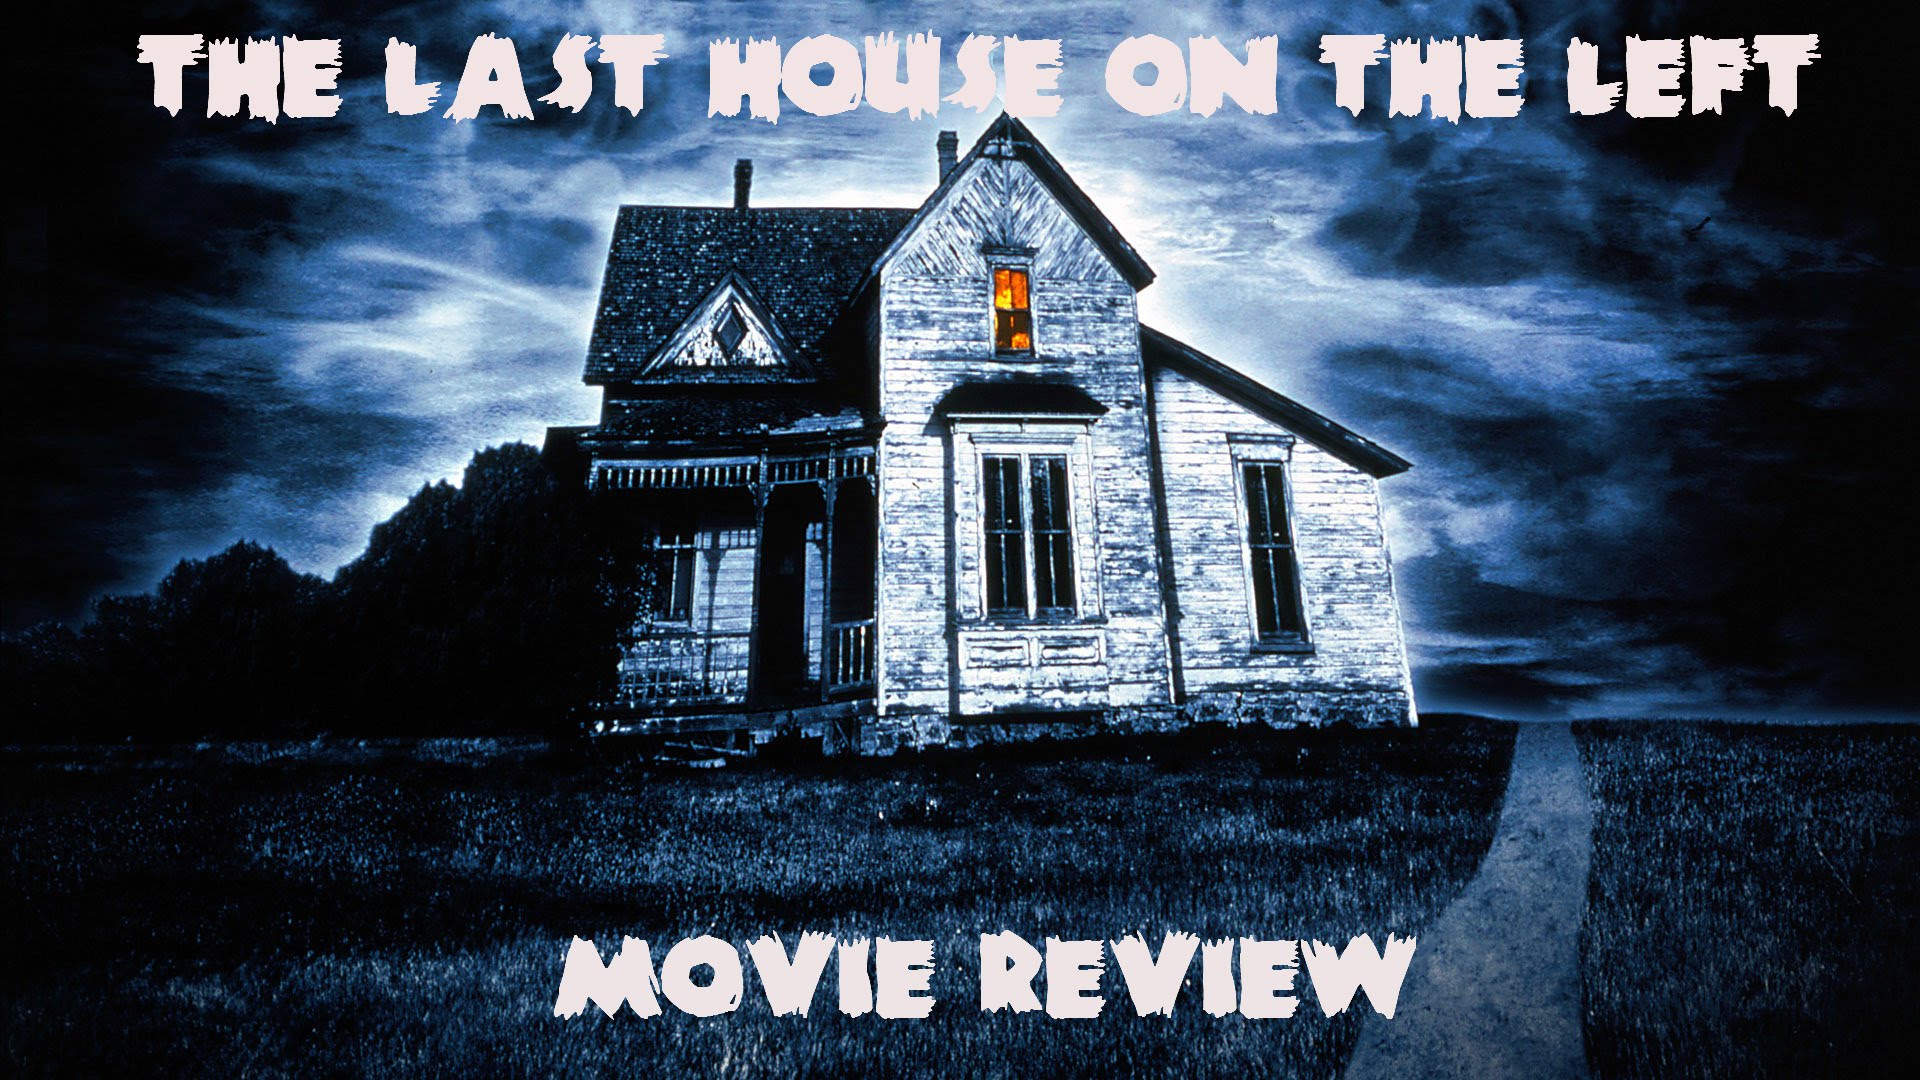 The Last House On The Left(1972) Movie Review - YouTube